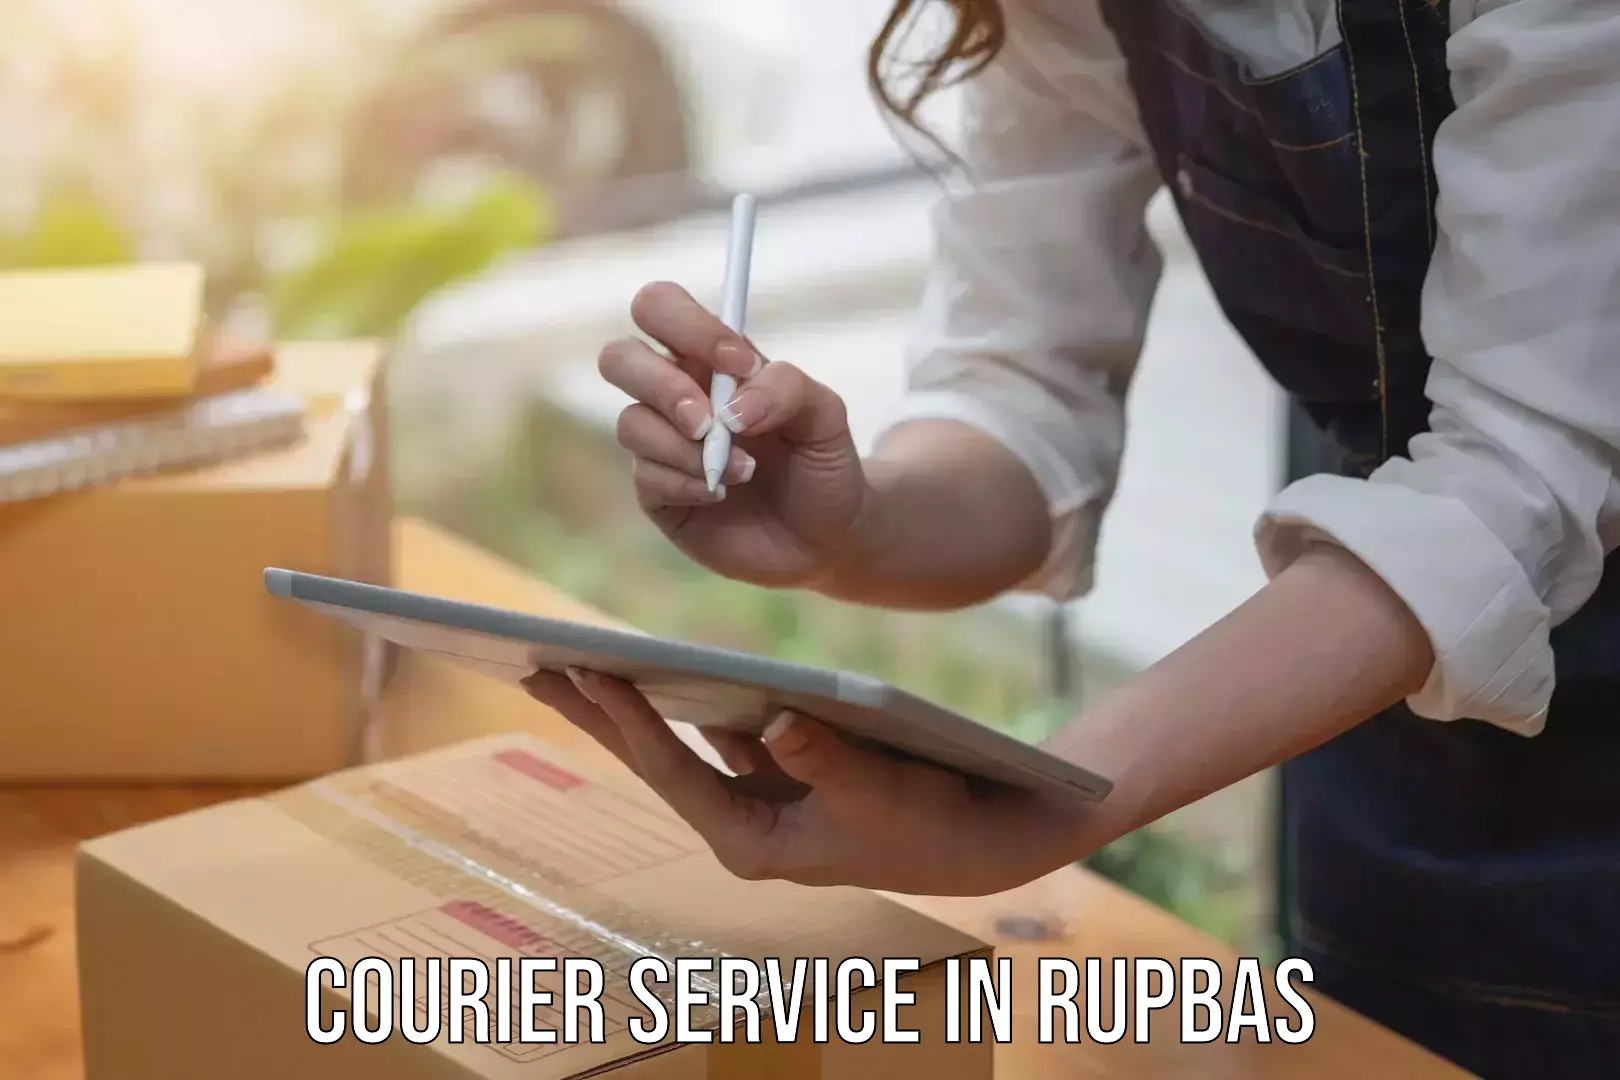 State-of-the-art courier technology in Rupbas